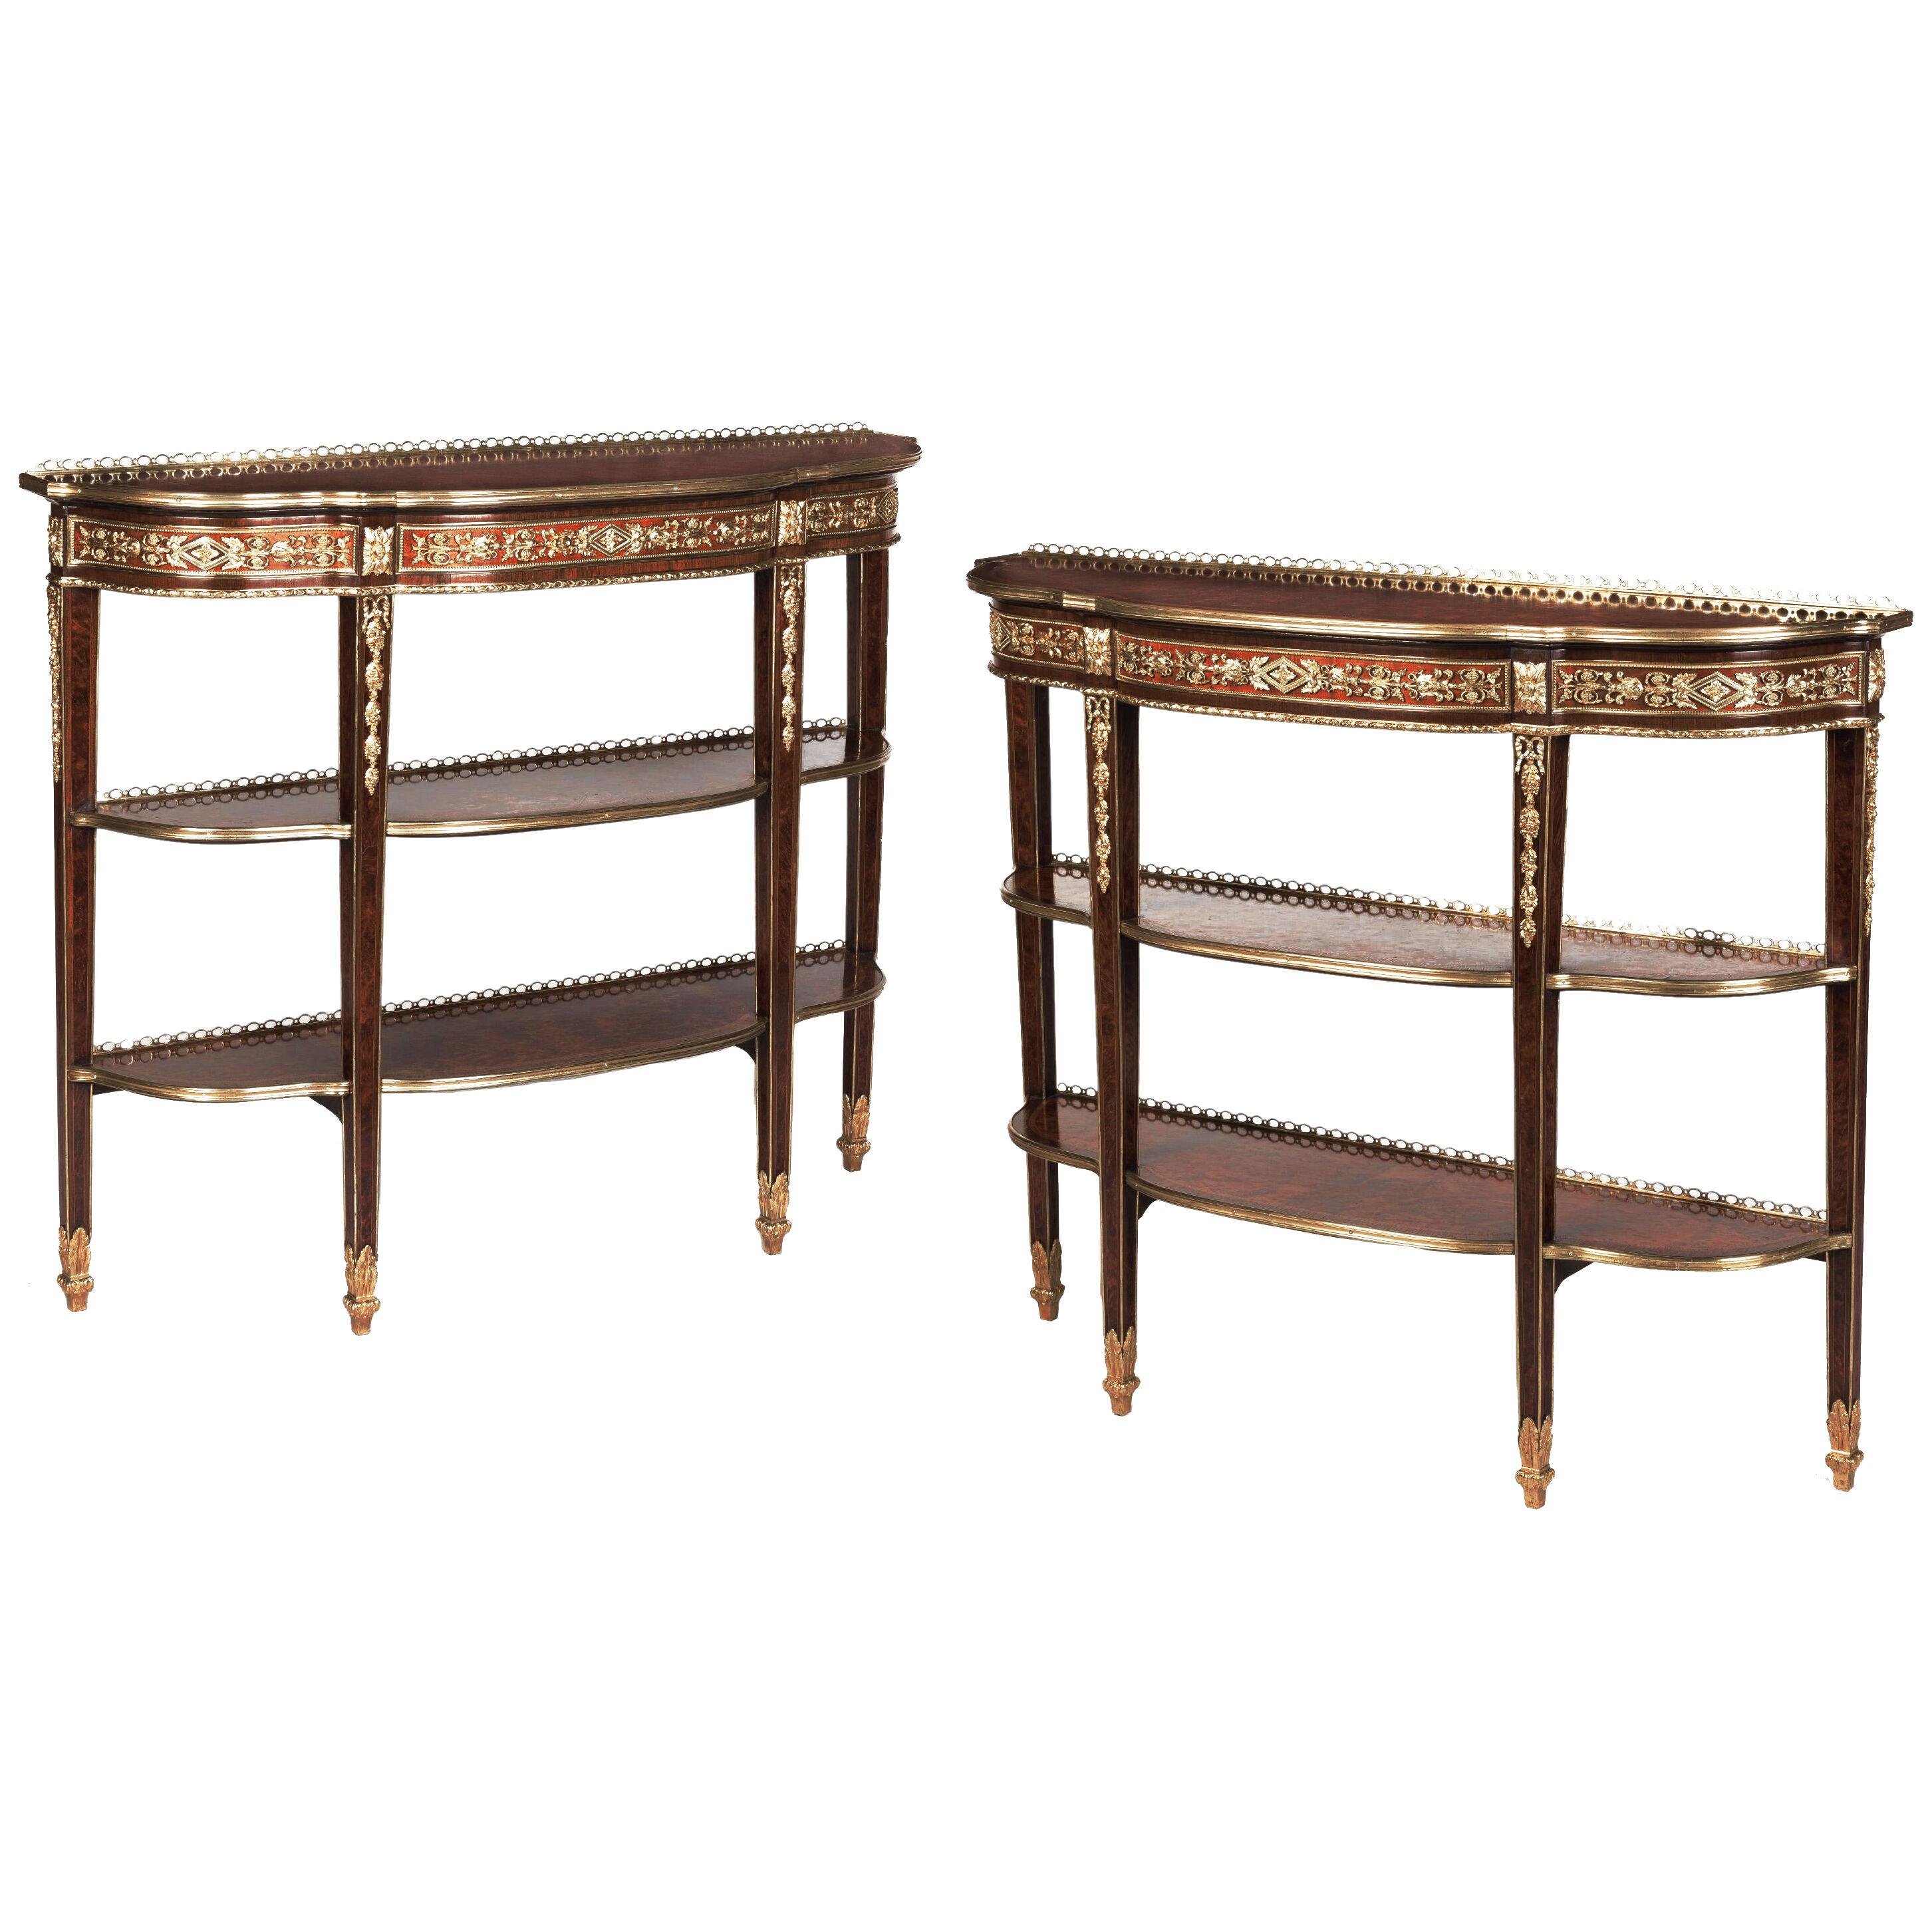 Rare and Exceptional Pair of Louis XVI Style Console Tables